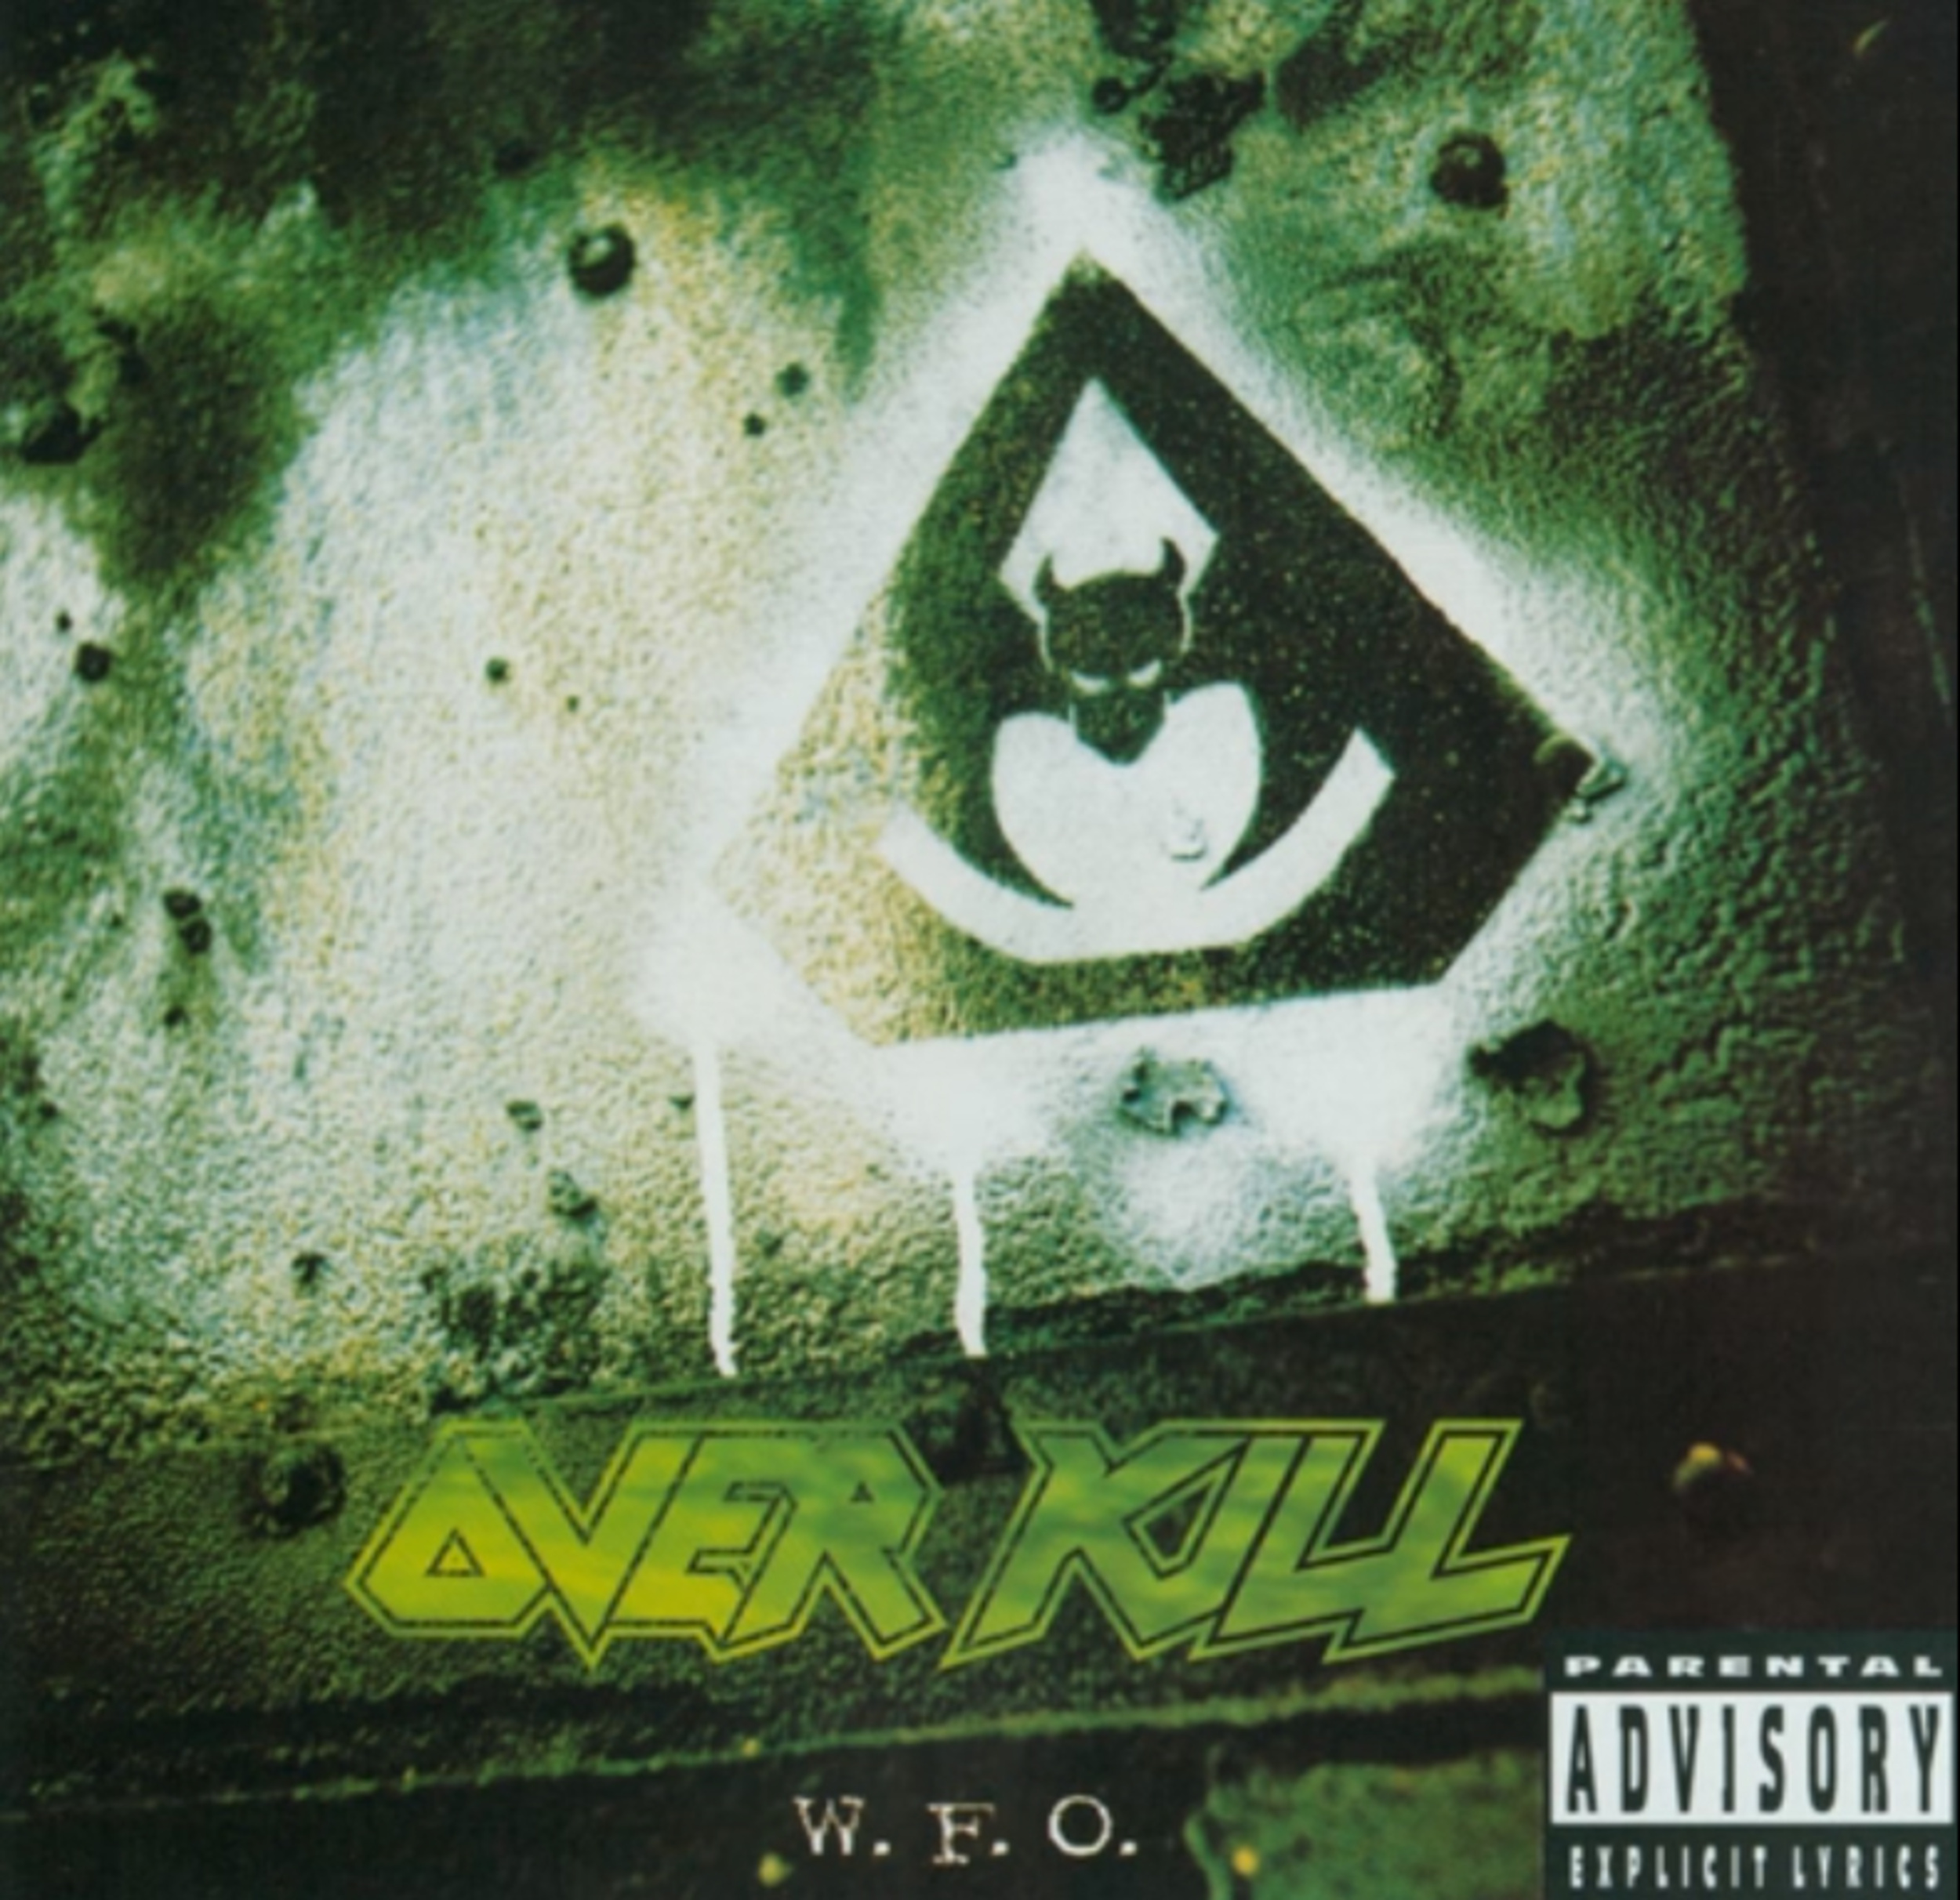 <p>New Jersey's Overkill released their seventh album in 1994, which would be their last for Atlantic Records. The fact that they were able to release five albums on Atlantic is a minor miracle. <em>W.F.O.</em> sees the band adding elements of doom and stoner to their unique brand of thrash metal. Although <em>W.F.O.</em> was critically loved, sales were not there to support the album. This would be their final album with guitarists Rob Cannavino and Merritt Gant.</p><p>You may also like: <a href='https://www.yardbarker.com/entertainment/articles/the_20_funniest_animated_movies/s1__39545534'>The 20 funniest animated movies</a></p>